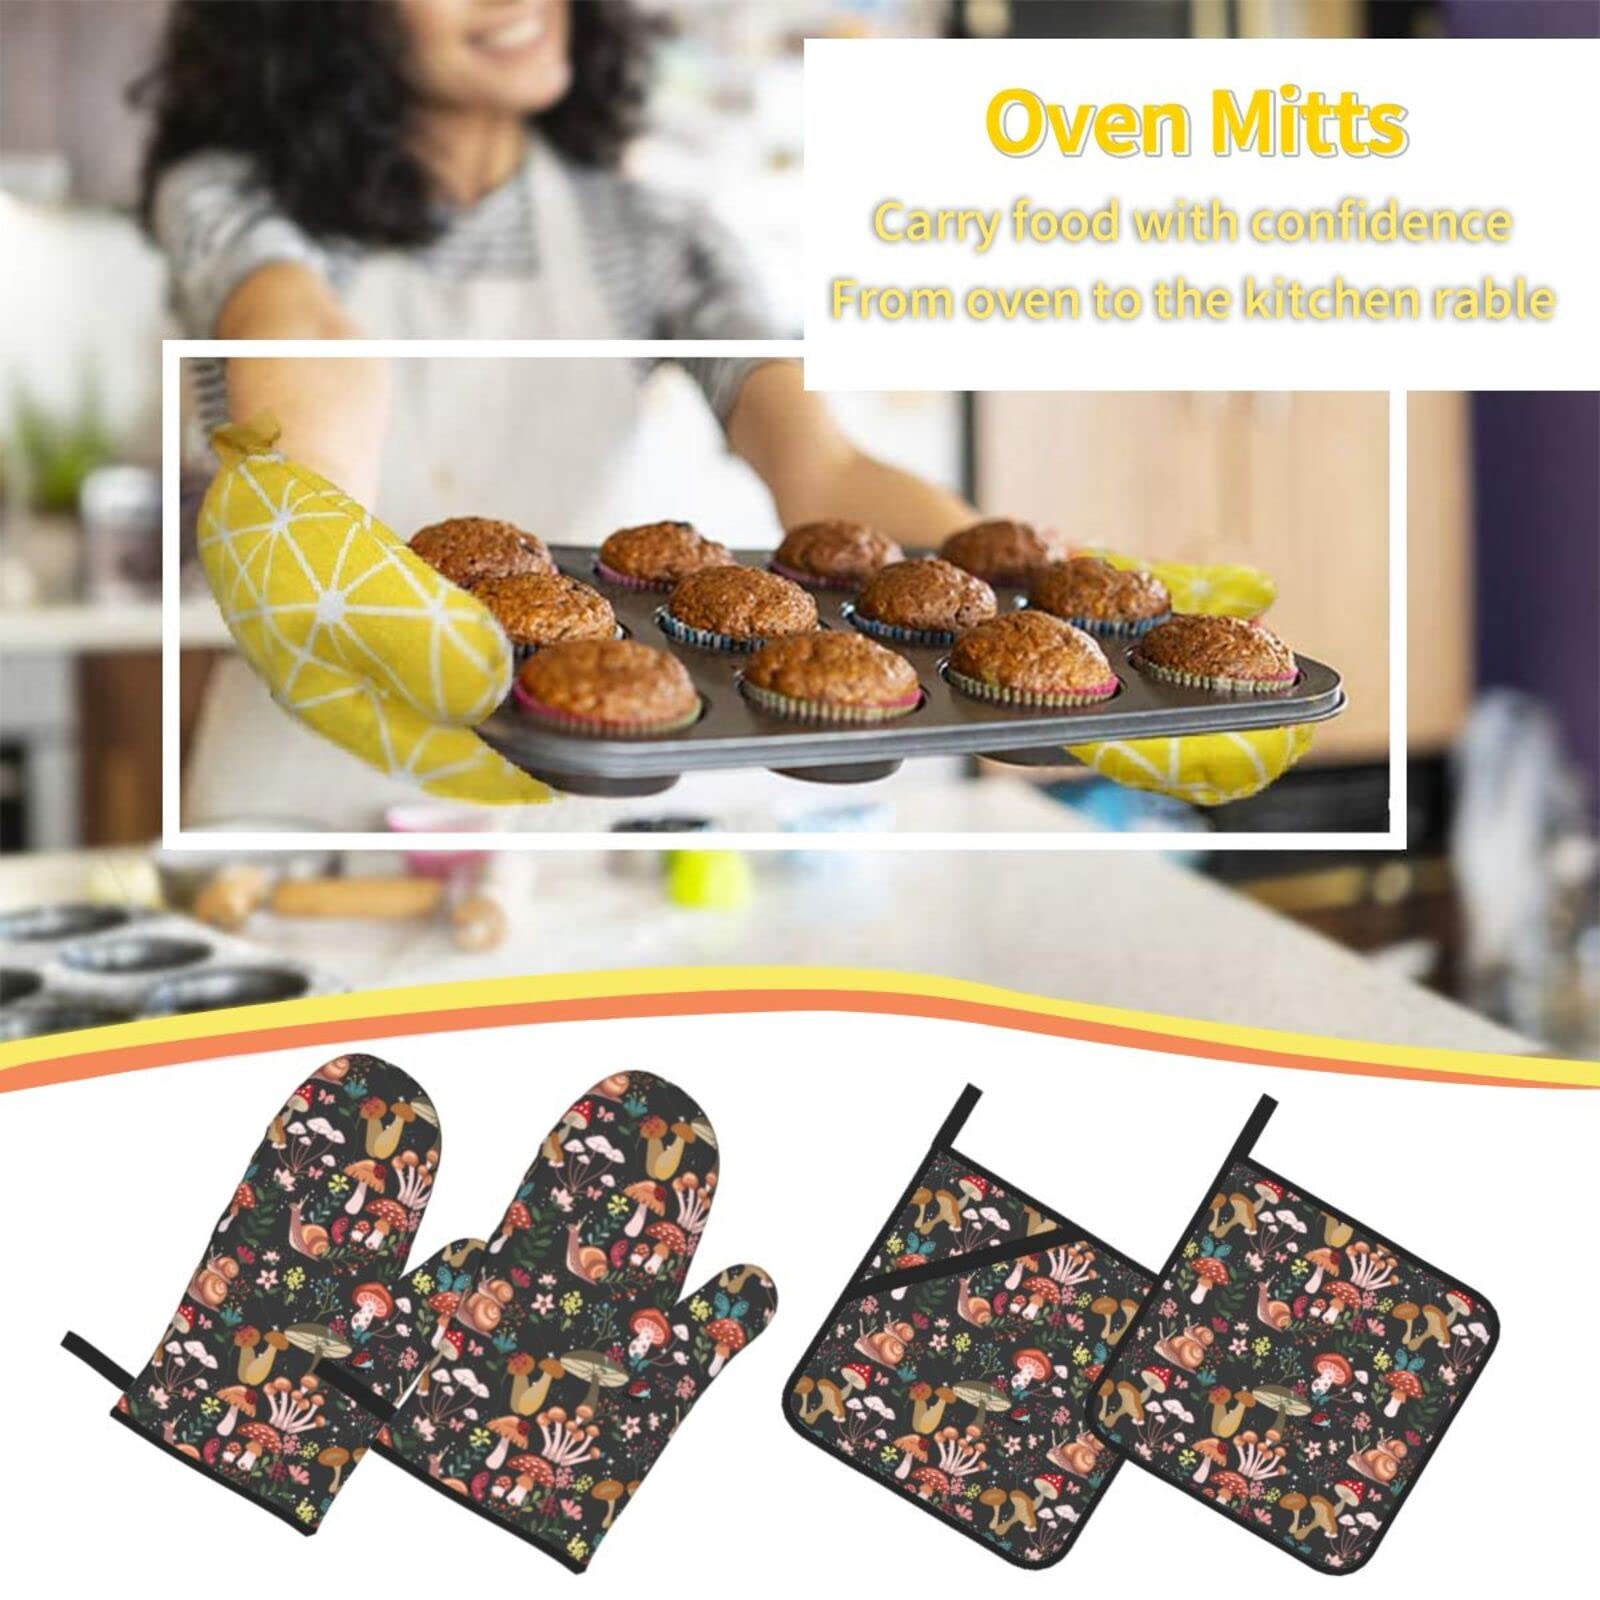 Mushrooms Snails Butterflies Oven Mitts and Potholders Professional Heat Resistant Cotton Oven Mitts Kitchen Gloves 4 Piece Set